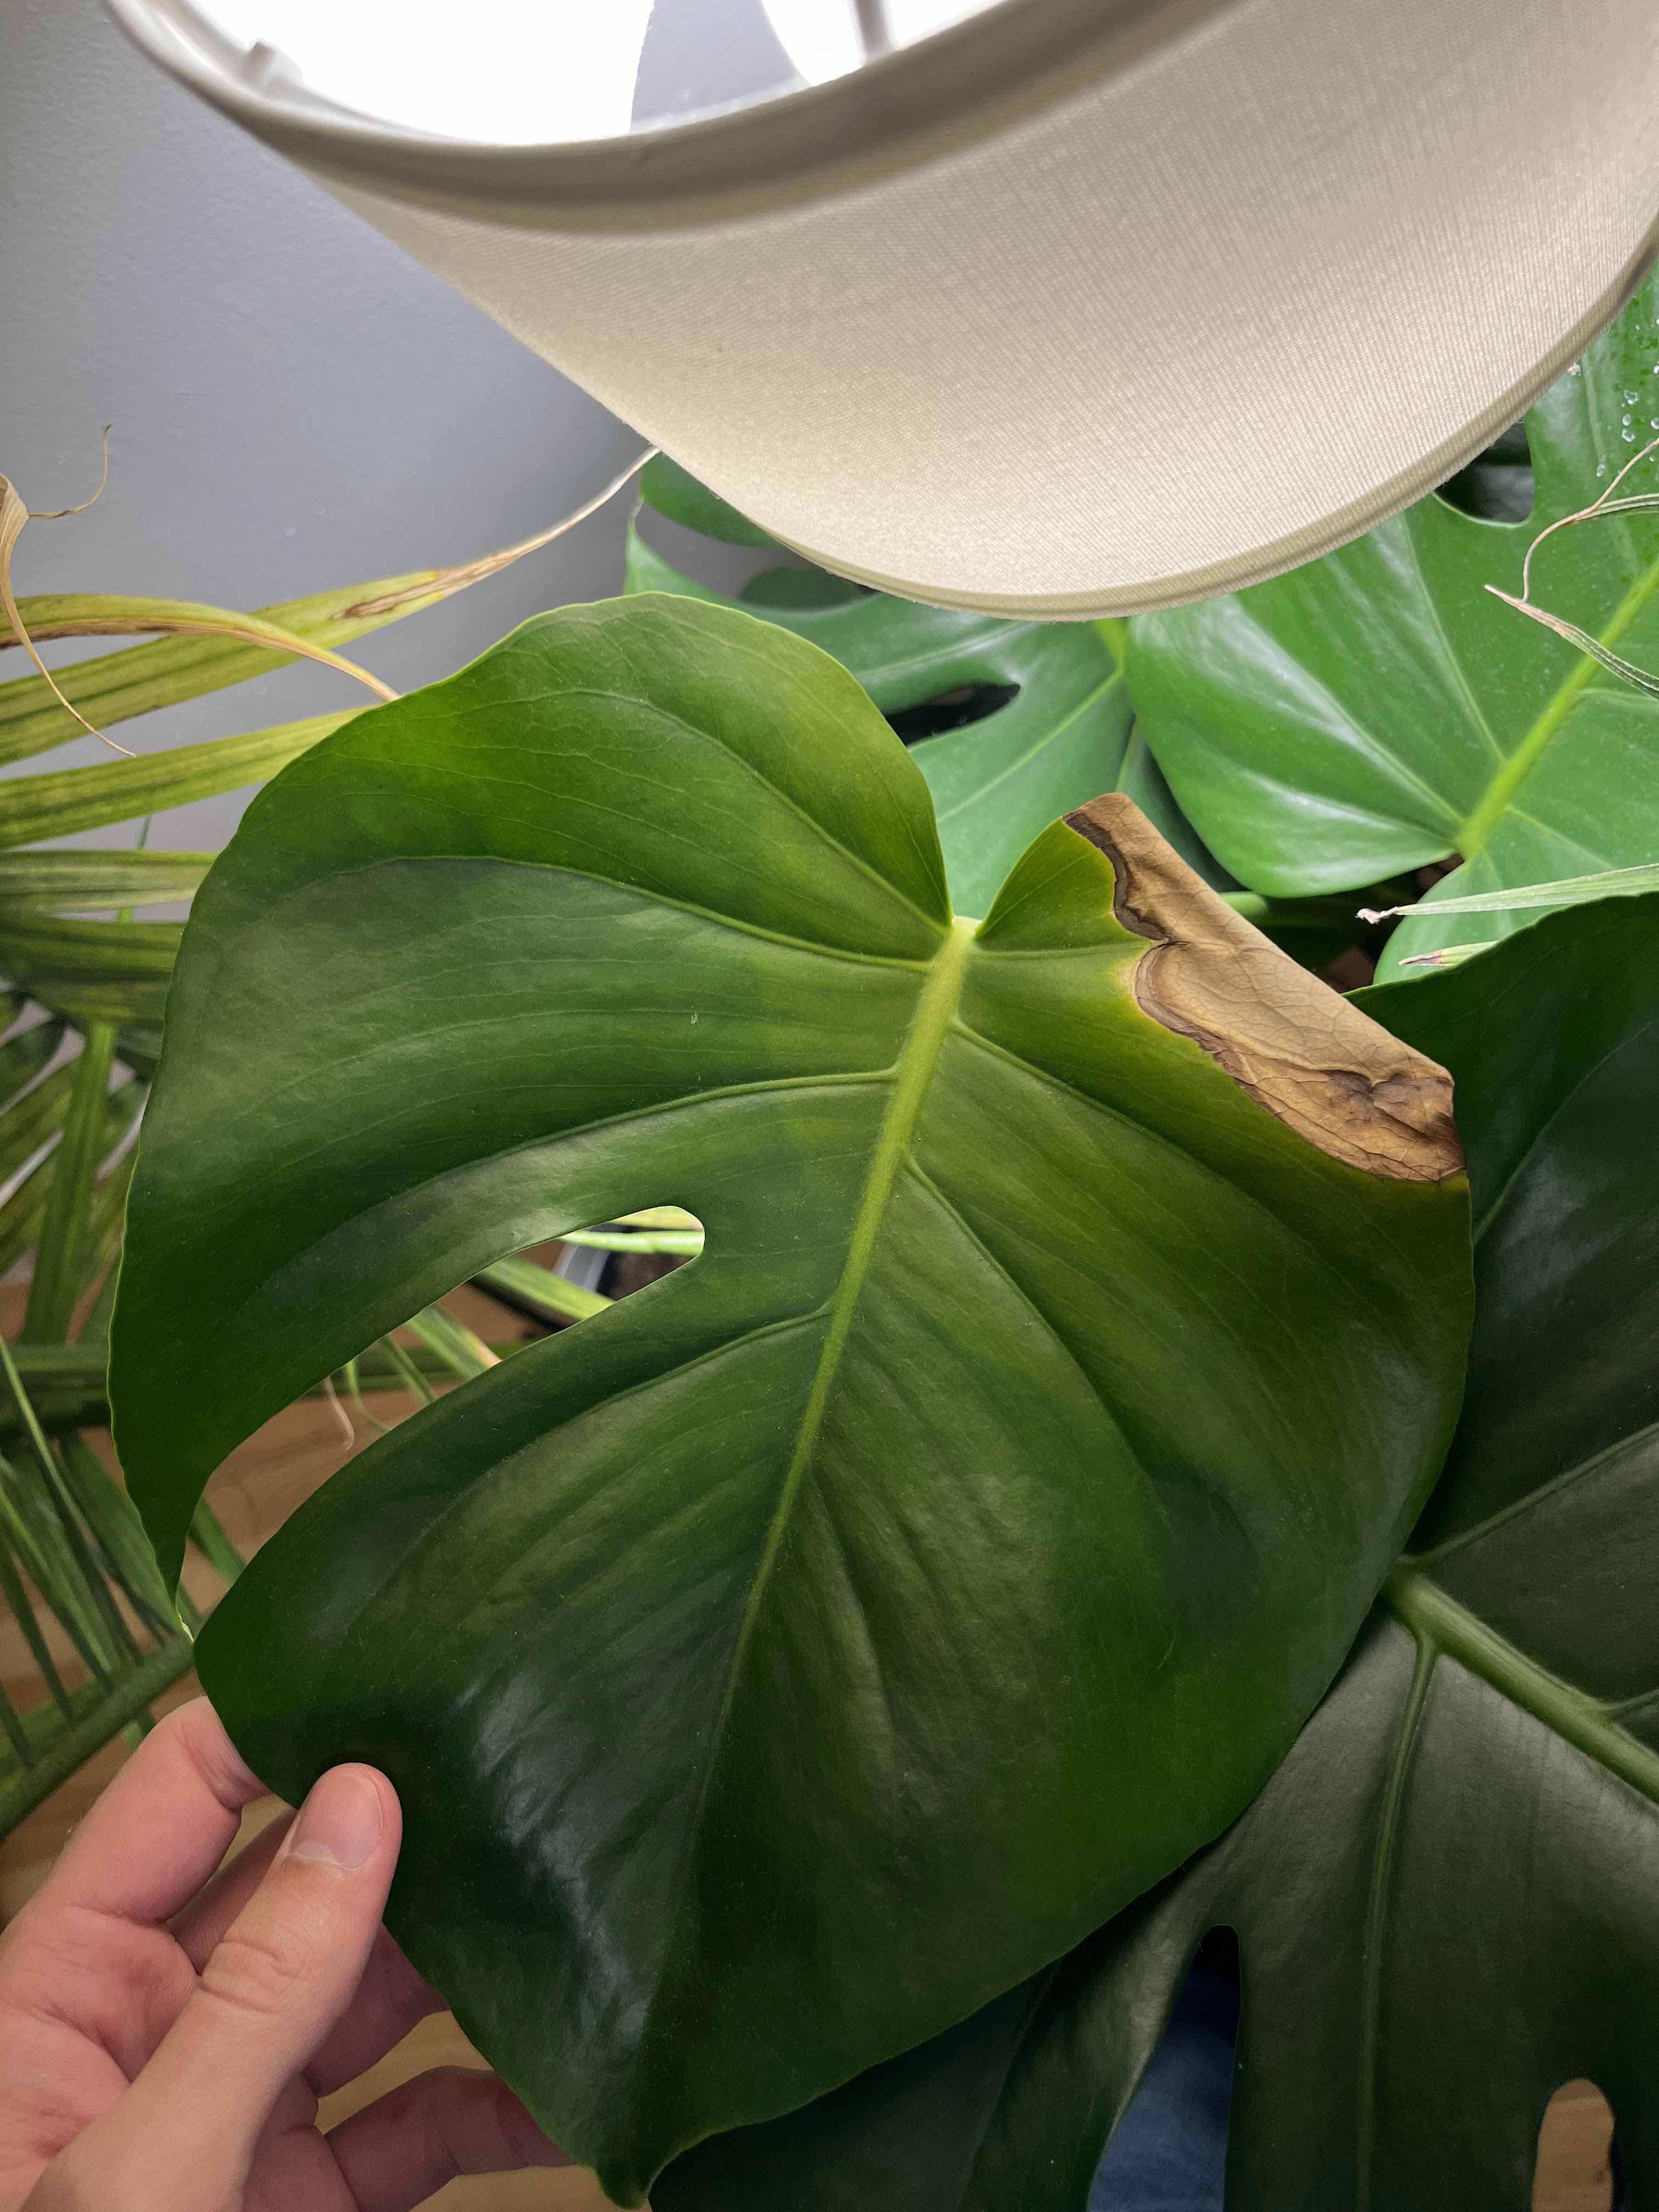 Monstera deliciosa leaf next to a light. The leaf is a deep green. There is a lighter green coloration forming a semicircle in the top right of the leaf, following the same curvature as the lamp next to it. At the far right edge the leaf is brown and curled.